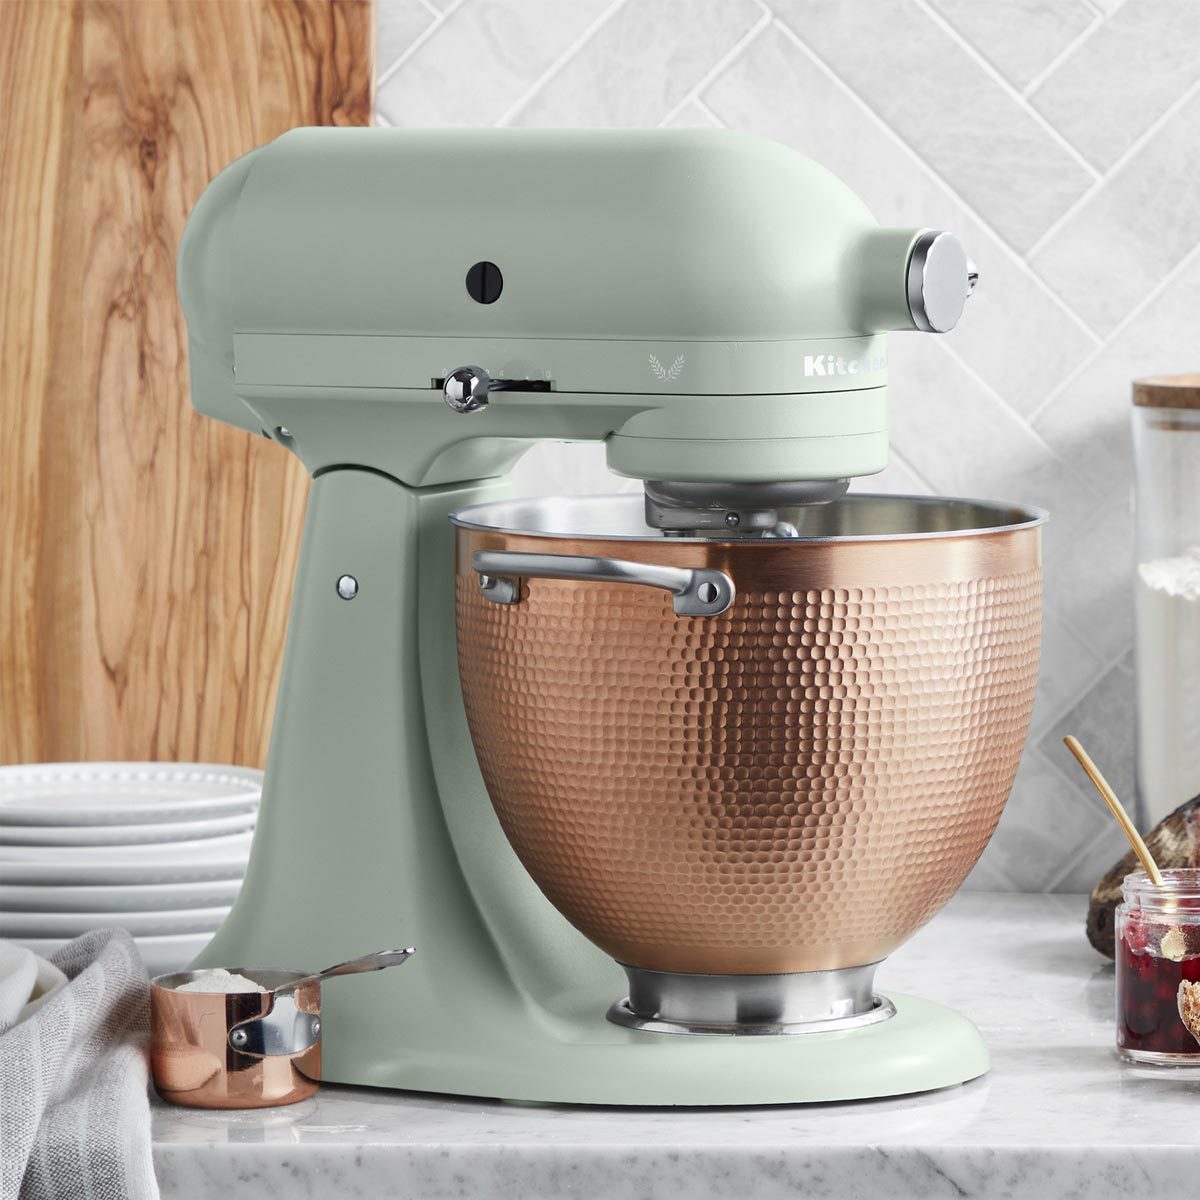 Kitchenaid Stand Mixer With Copper Bowl